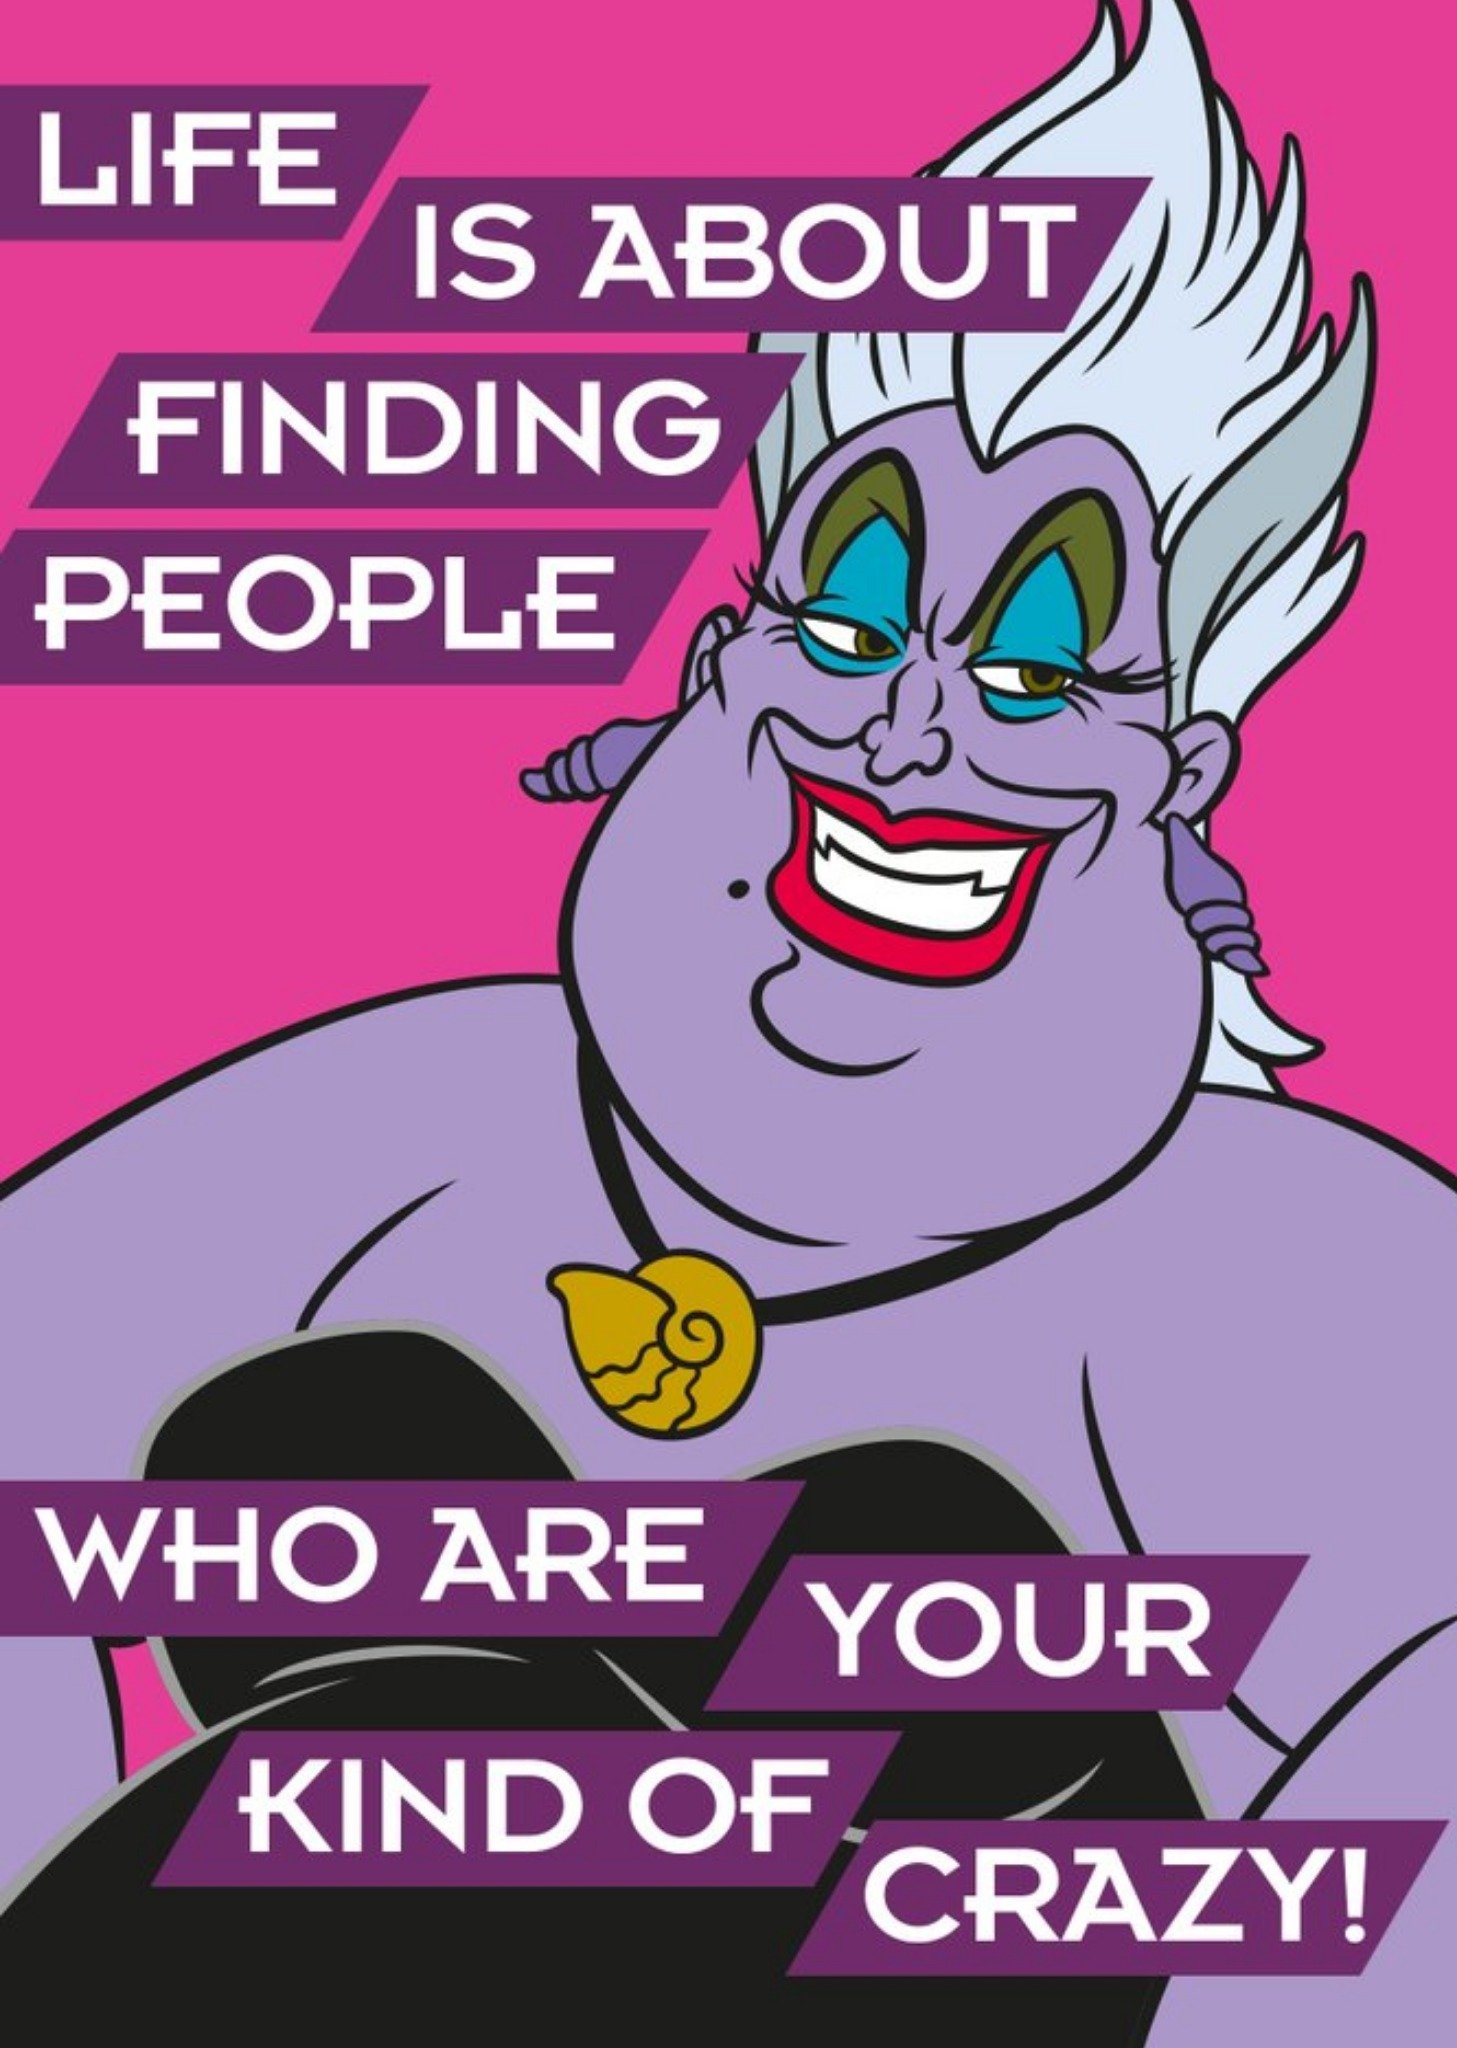 Disney The Little Mermaid Ursula Find Your Kind Of Crazy Card Ecard